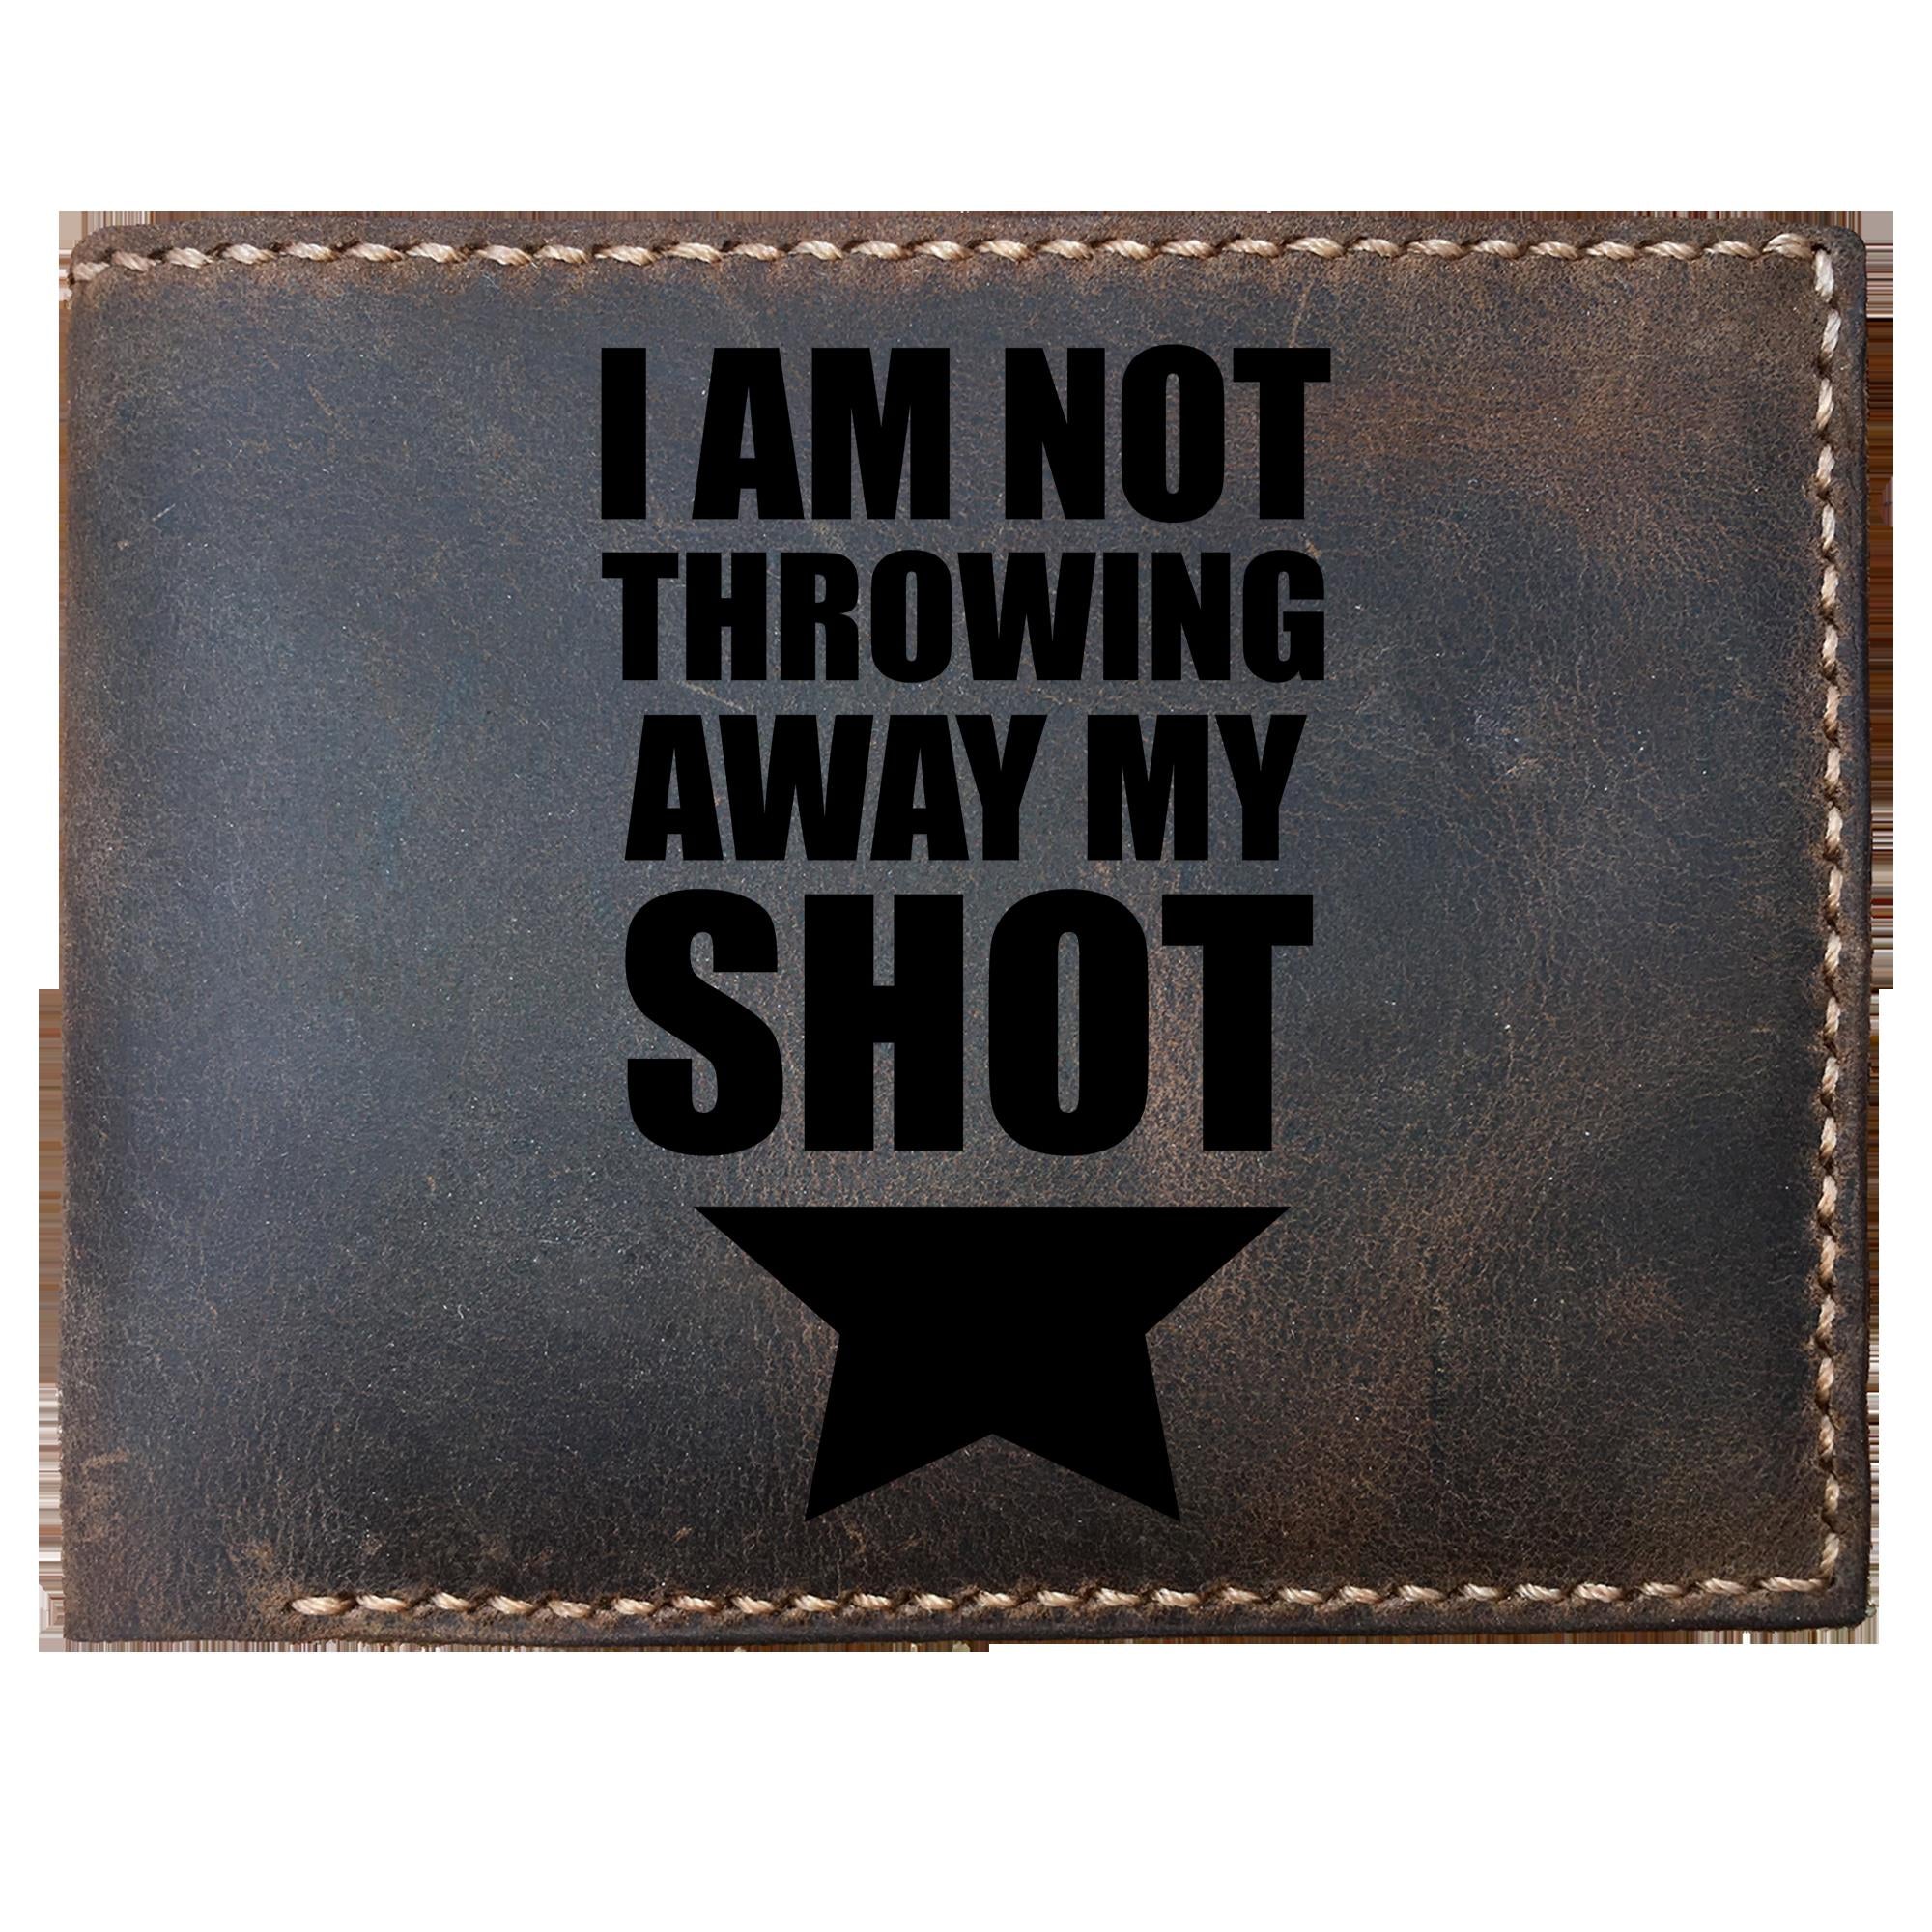 Skitongifts Funny Custom Laser Engraved Bifold Leather Wallet For Men, I Am Not Throwing Away My Shot